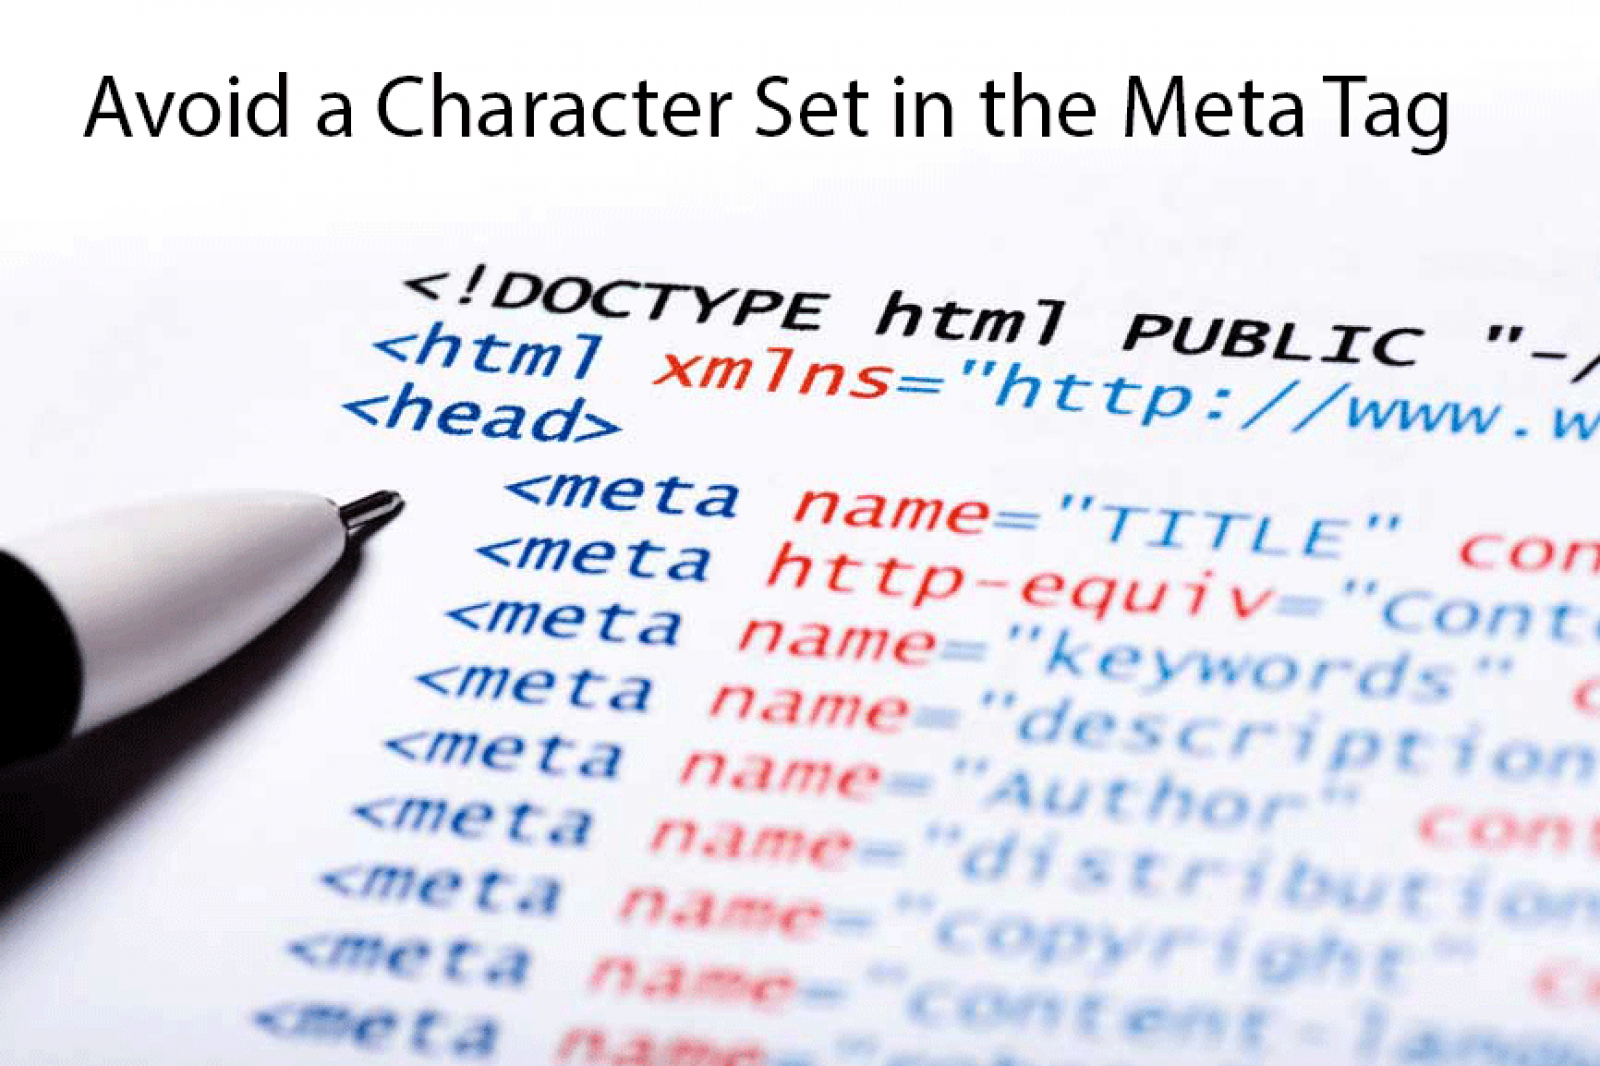 Avoid a Character Set in the Meta Tag